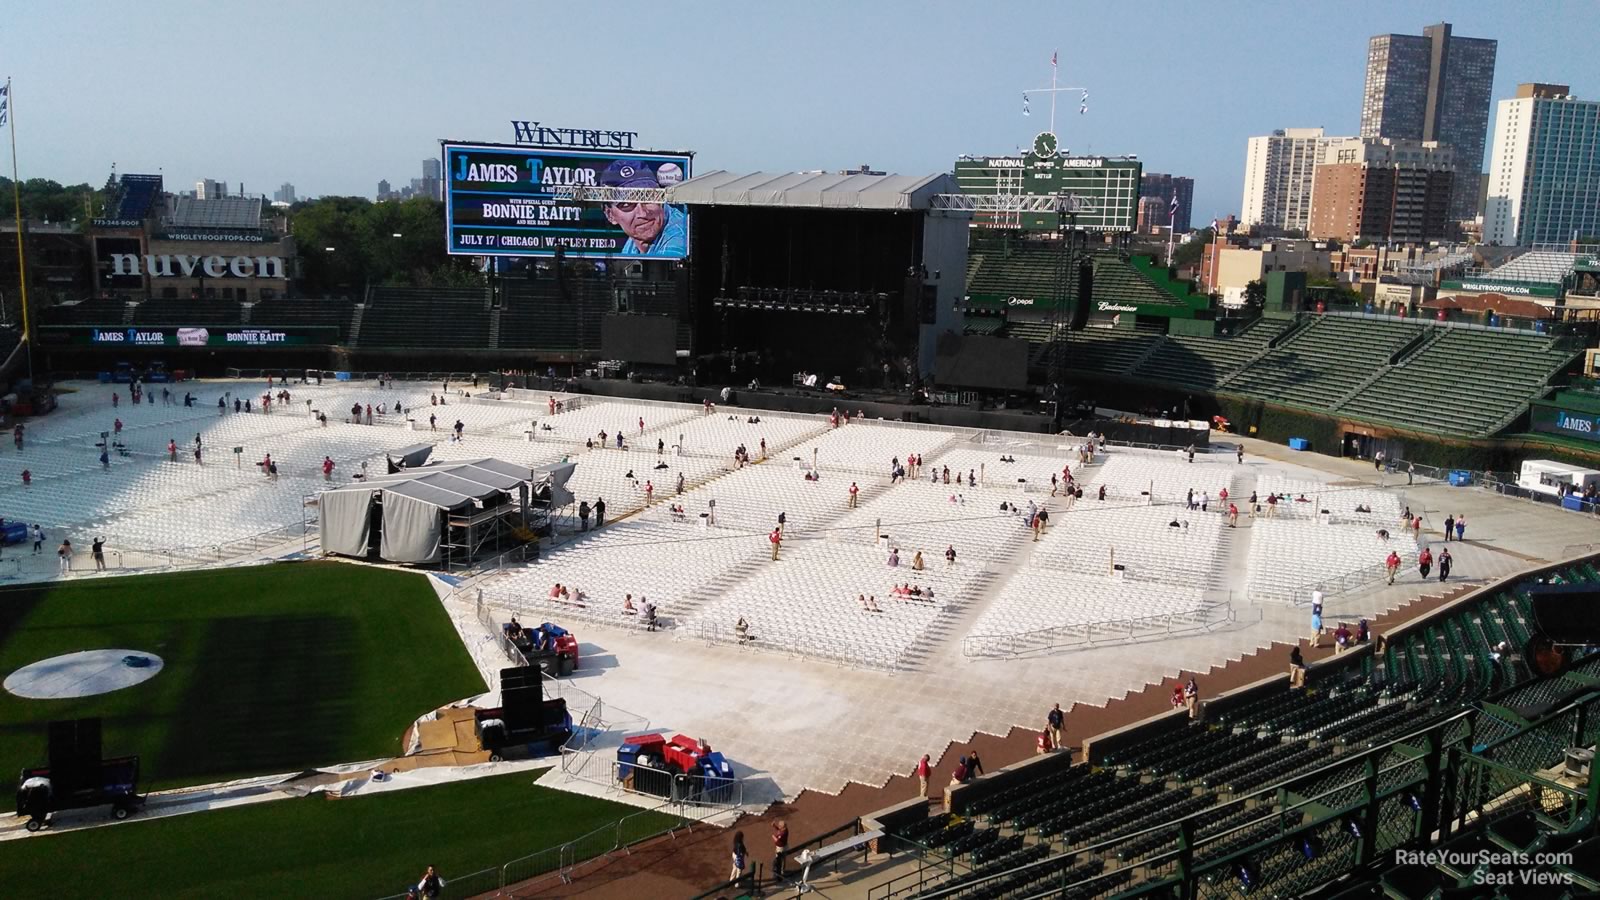 section 324, row 5 seat view  for concert - wrigley field